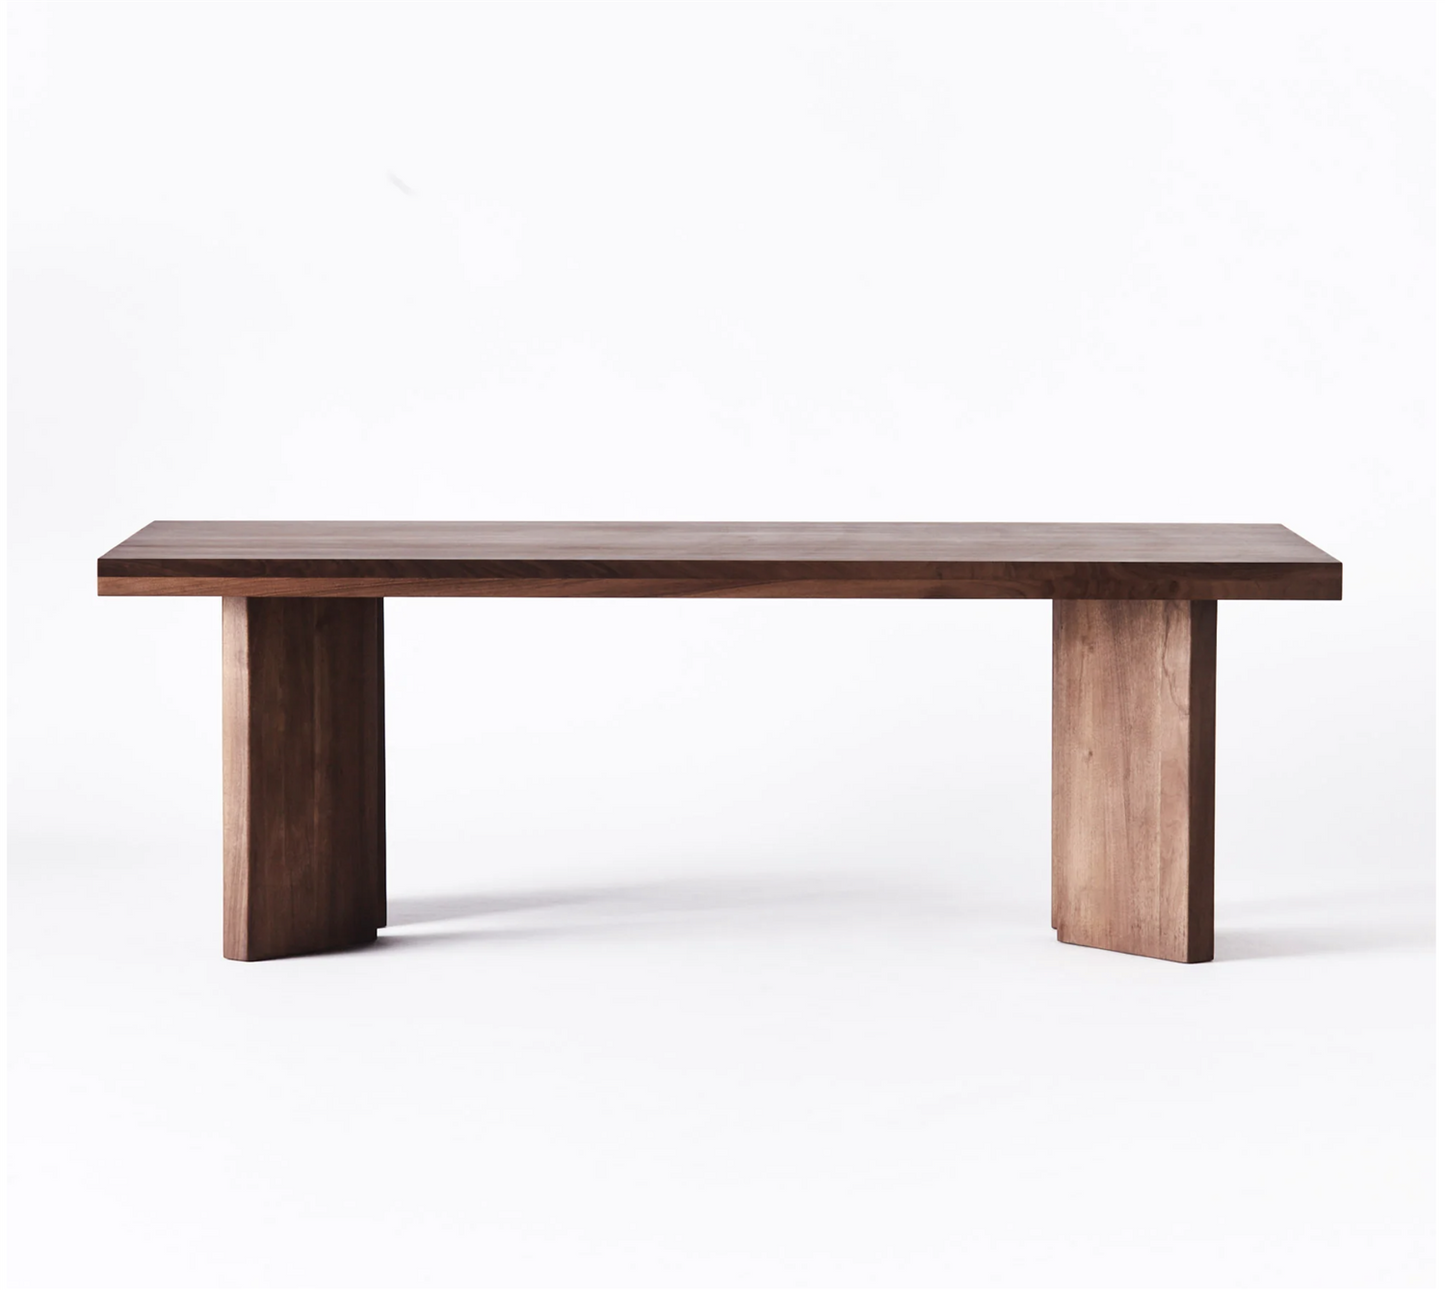 FRENCH DINING TABLE WALNUT 100-180cm